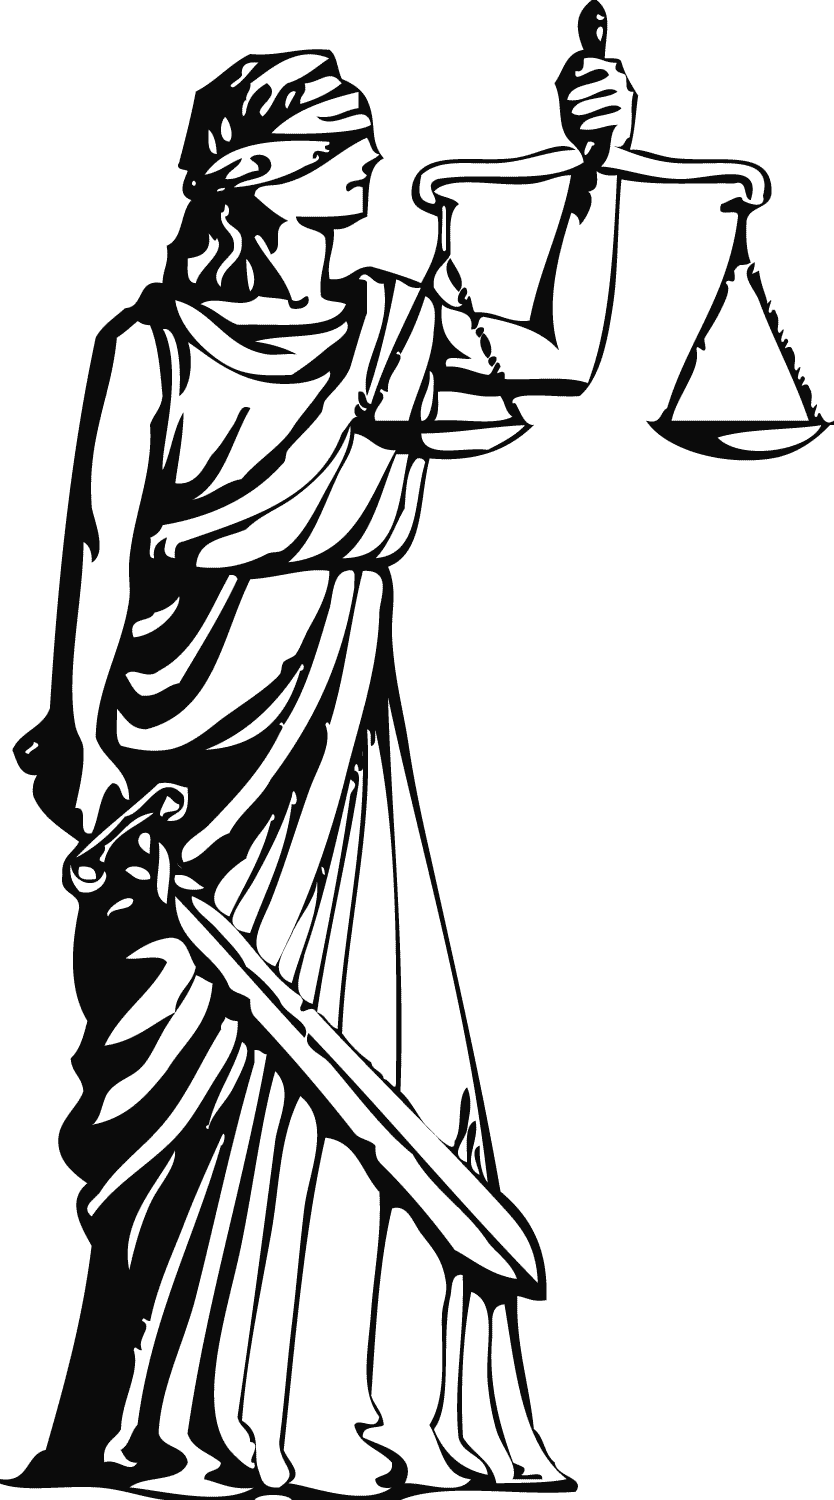 Honest clipart scales justice. Lawyers to file overturn